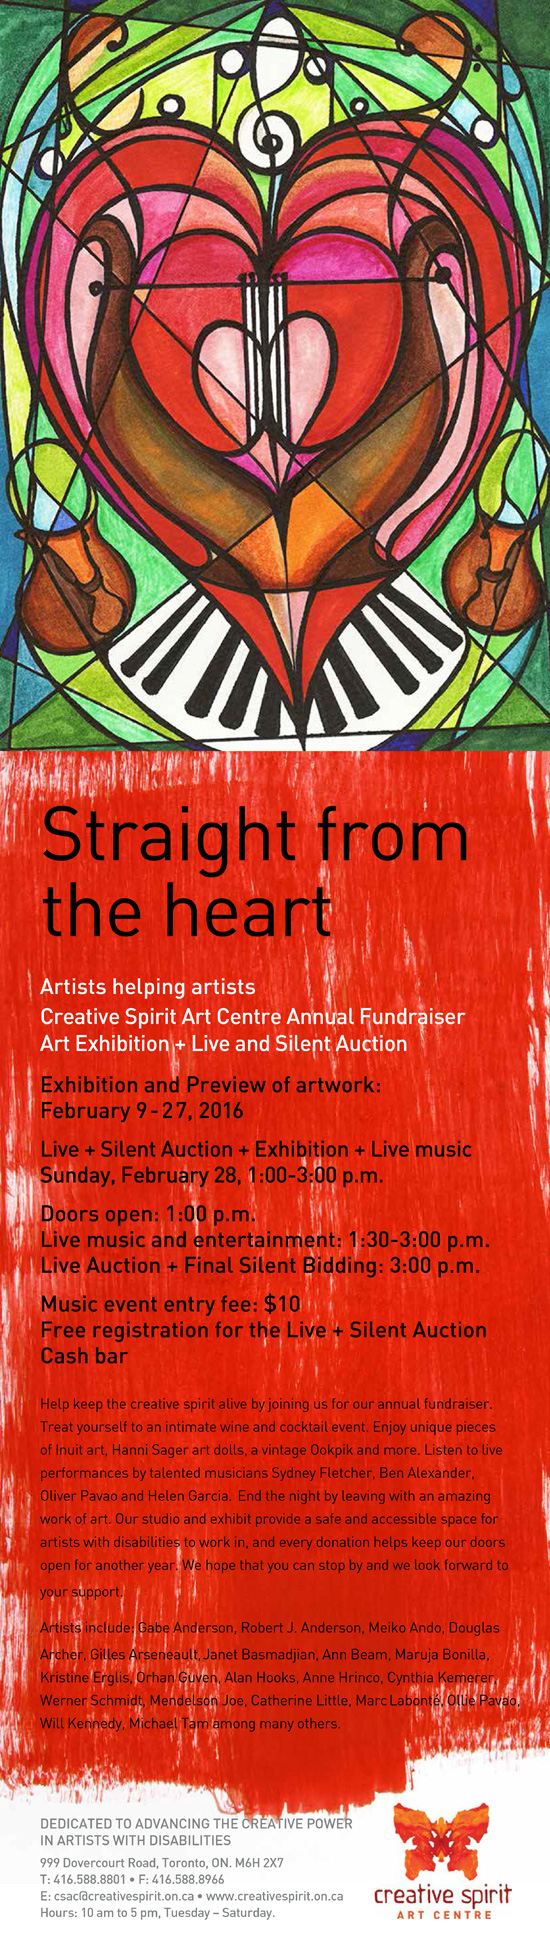 Straight from the Heart 2016 - Annual CSAC fundraiser